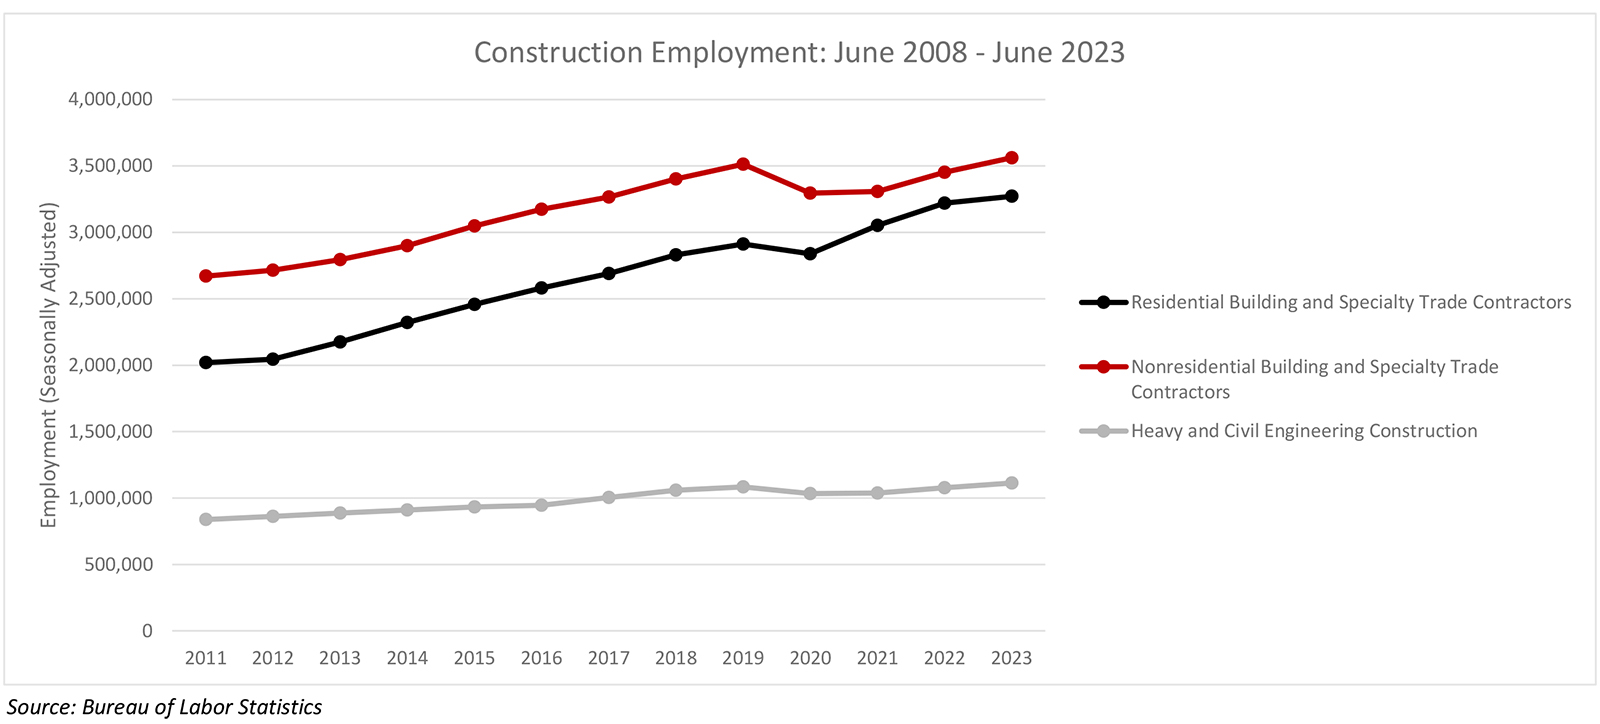 Nonresidential Construction Employment Increased by 12,200 Jobs in June